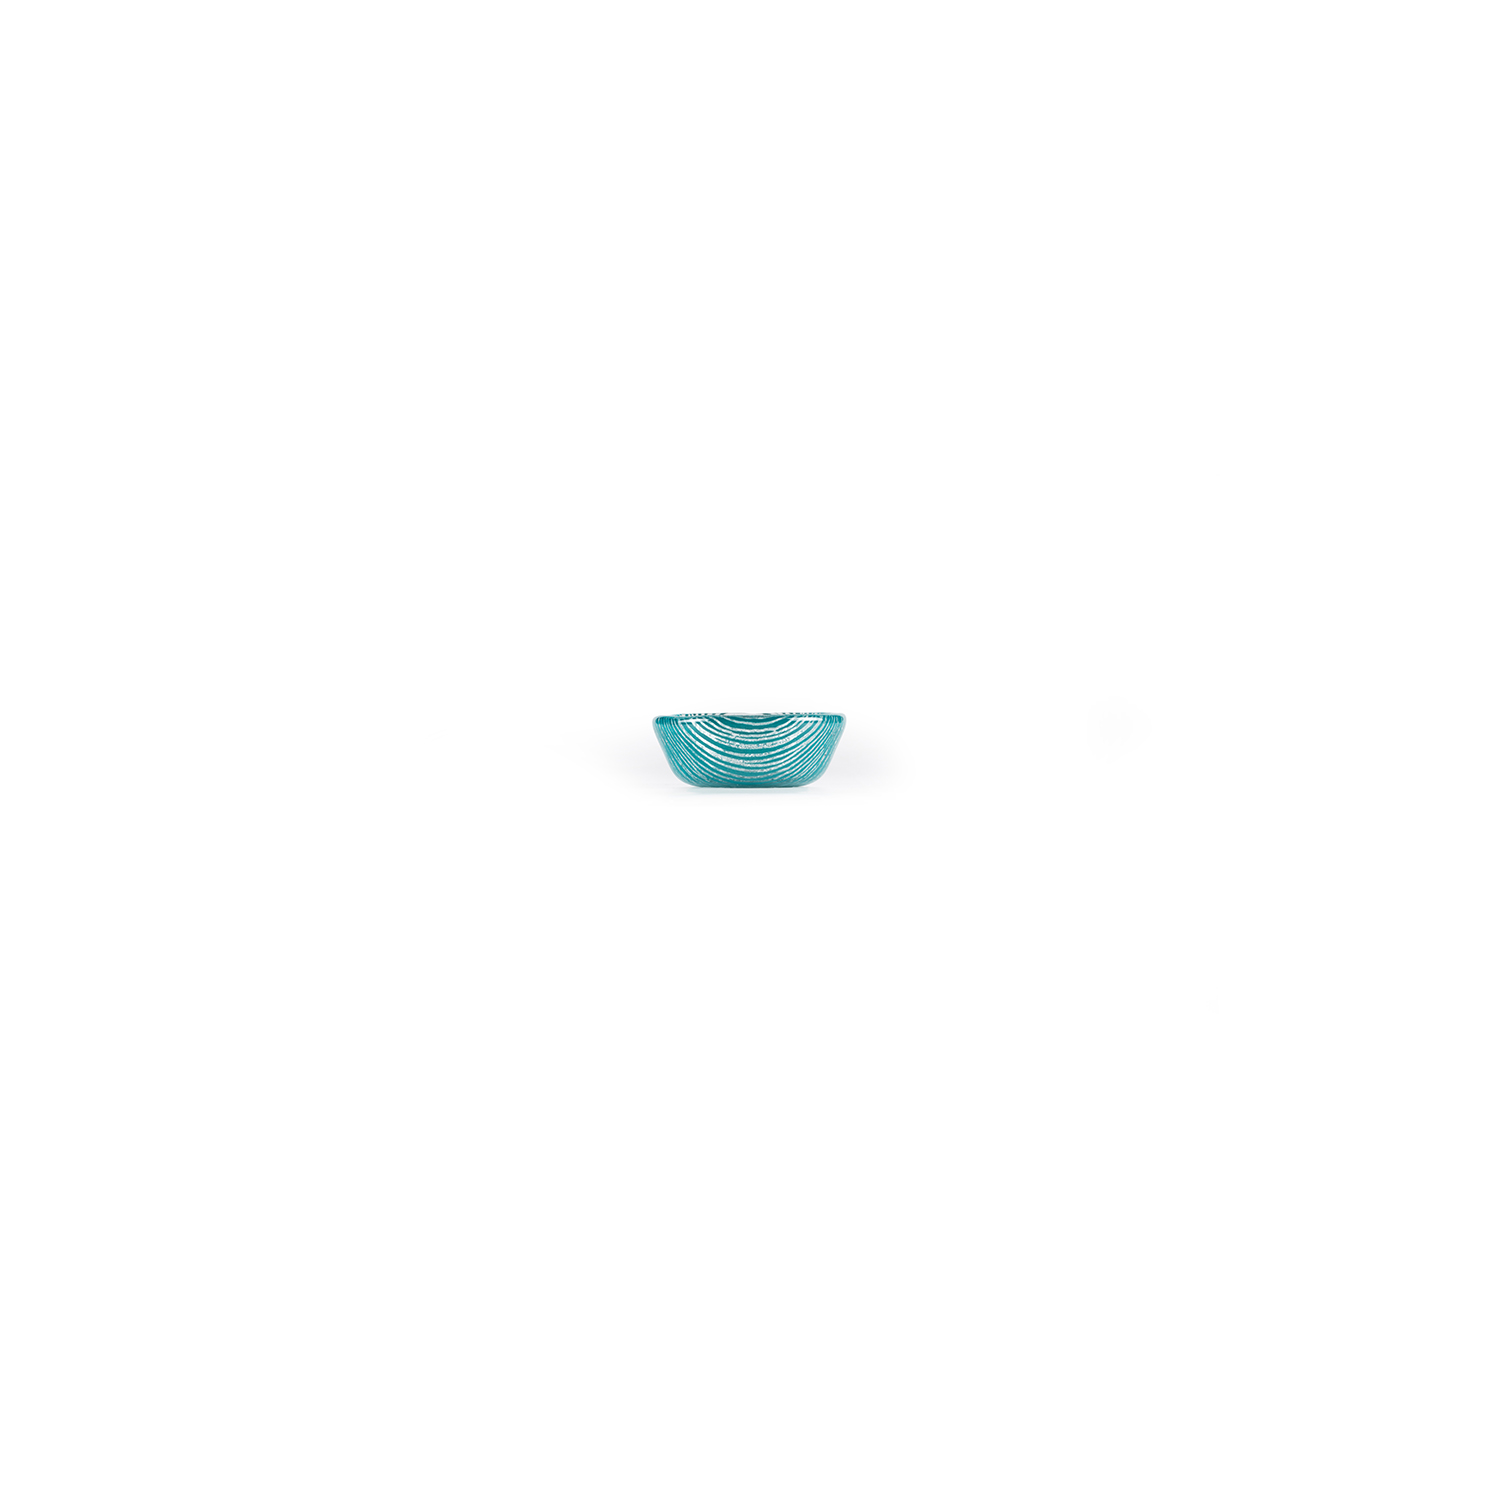 Fusion Glass Bowl Turquoise Round 2.75″ x 2.75″ x 1.25″  4 oz. CasePack:24